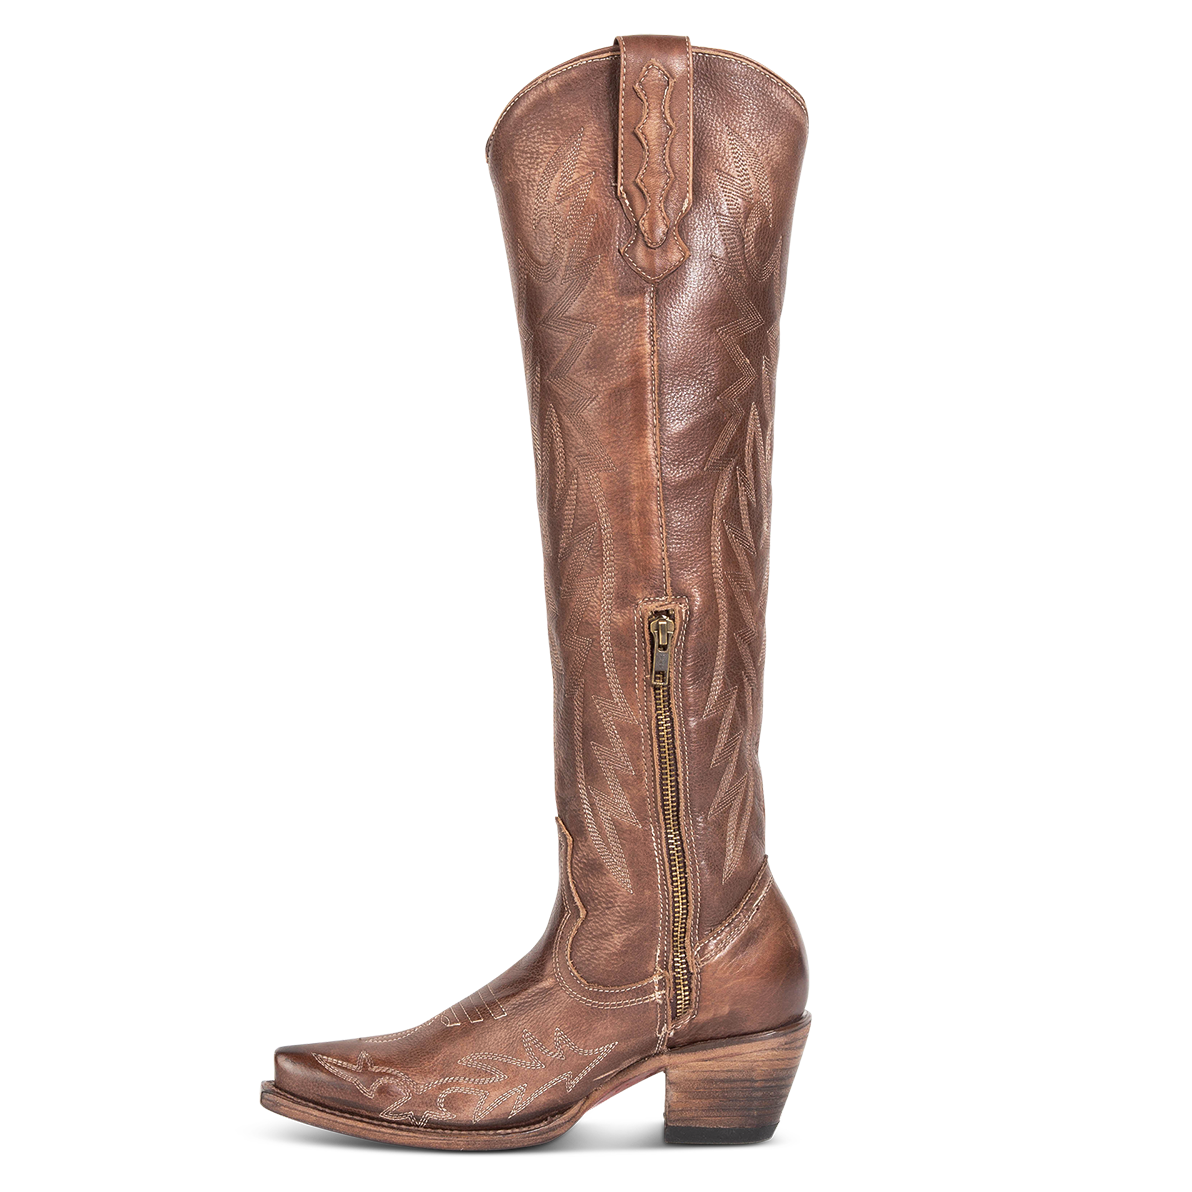 Inside view showing stitch detailing and zipper on FREEBIRD women's Wonder brown leather tall western boot